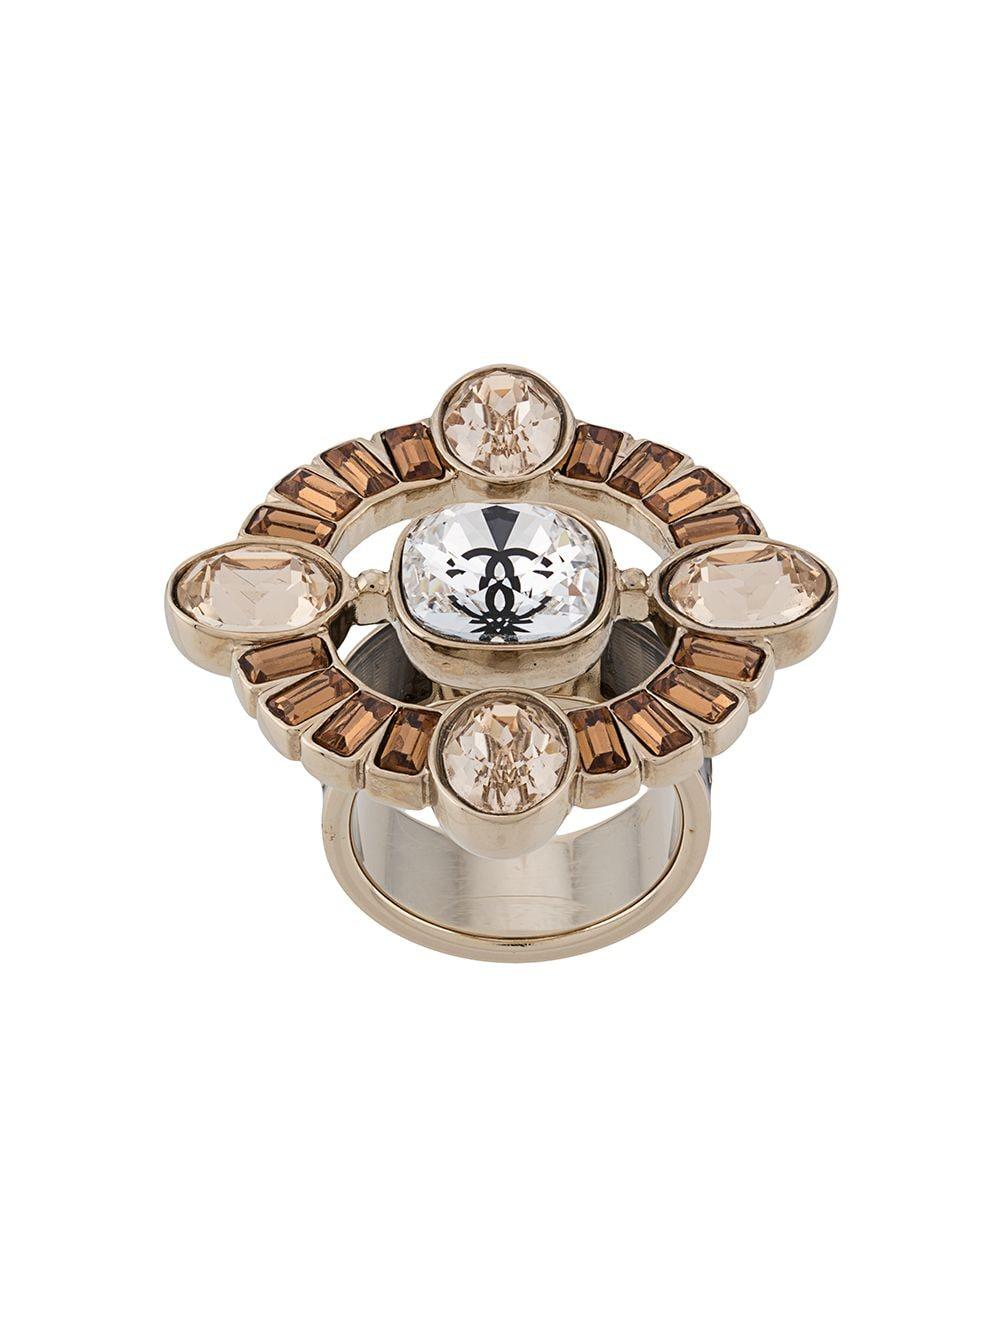 Crafted in France from gold-plated metal, this ornate vintage ring from Chanel features an elegant circular design, crystal embellishments arranged into the shape of the iconic maltese cross and the brand's signature interlocking CC logo in the